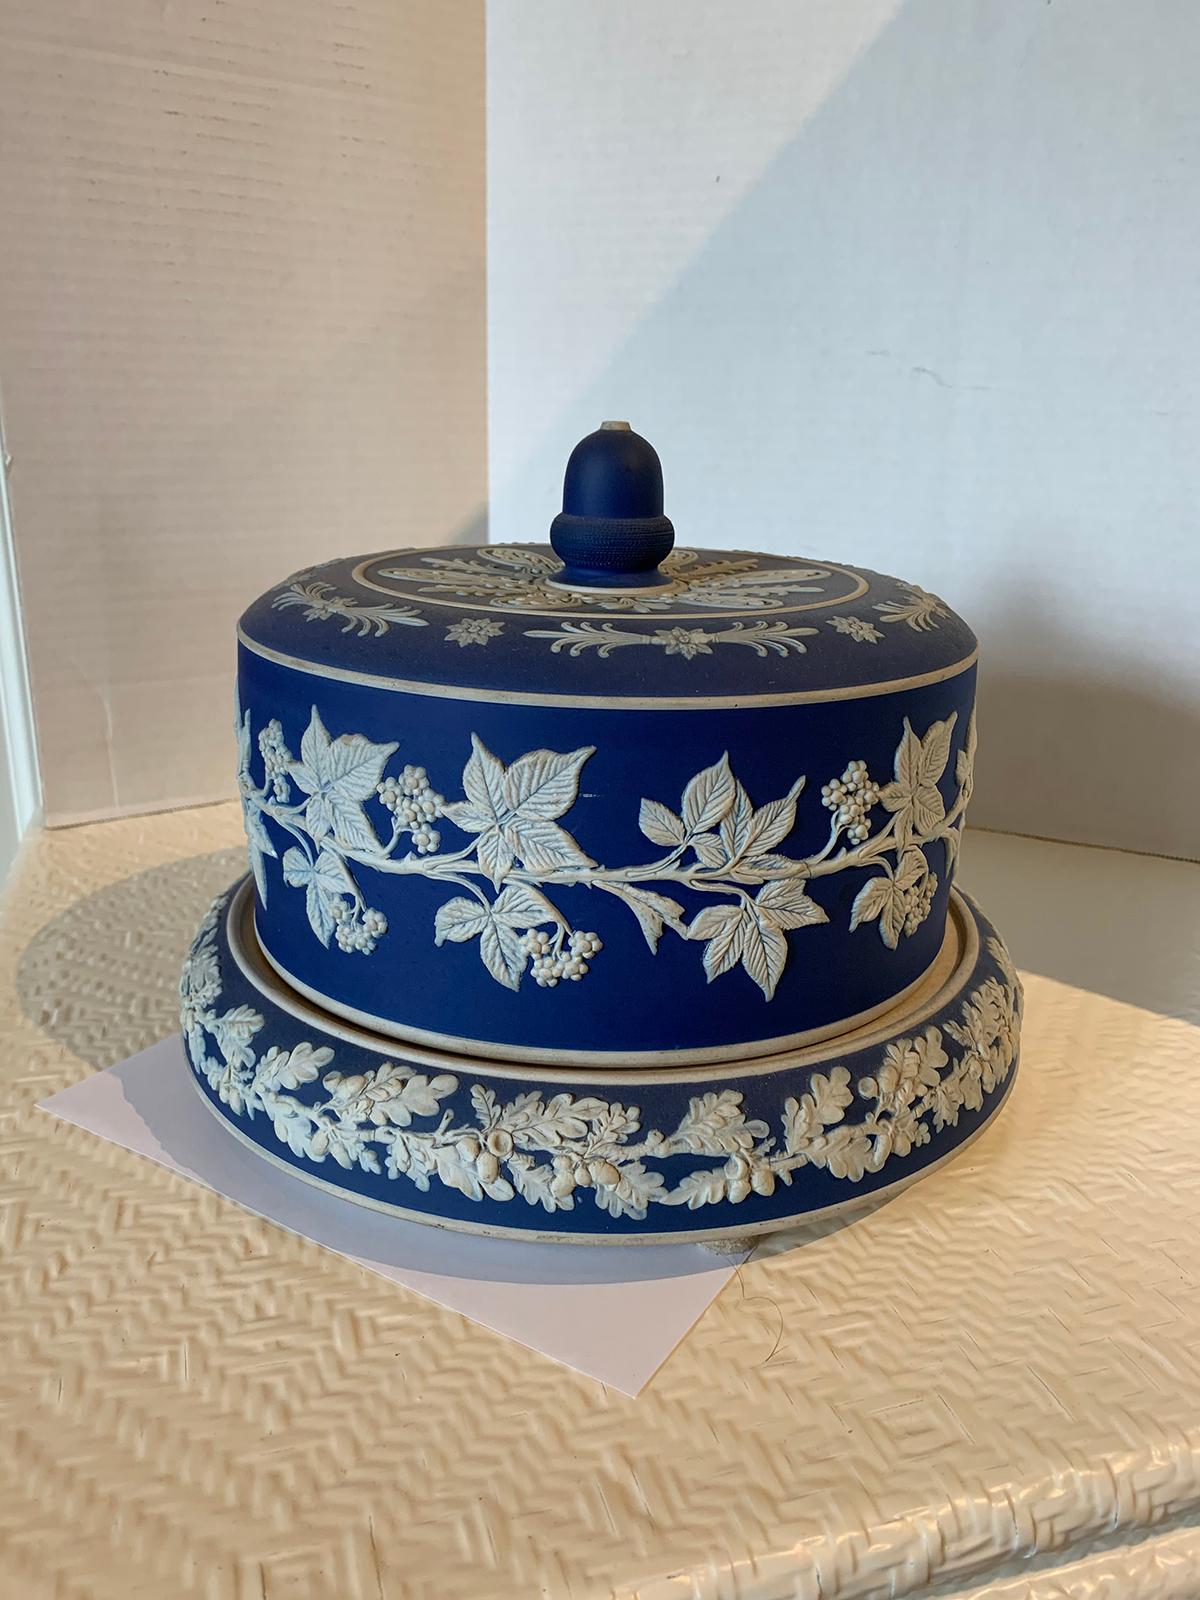 19th century circa 1860 English cobalt and white Jasperware cheese dome by Dudson Stilton in the style of Wedgwood.